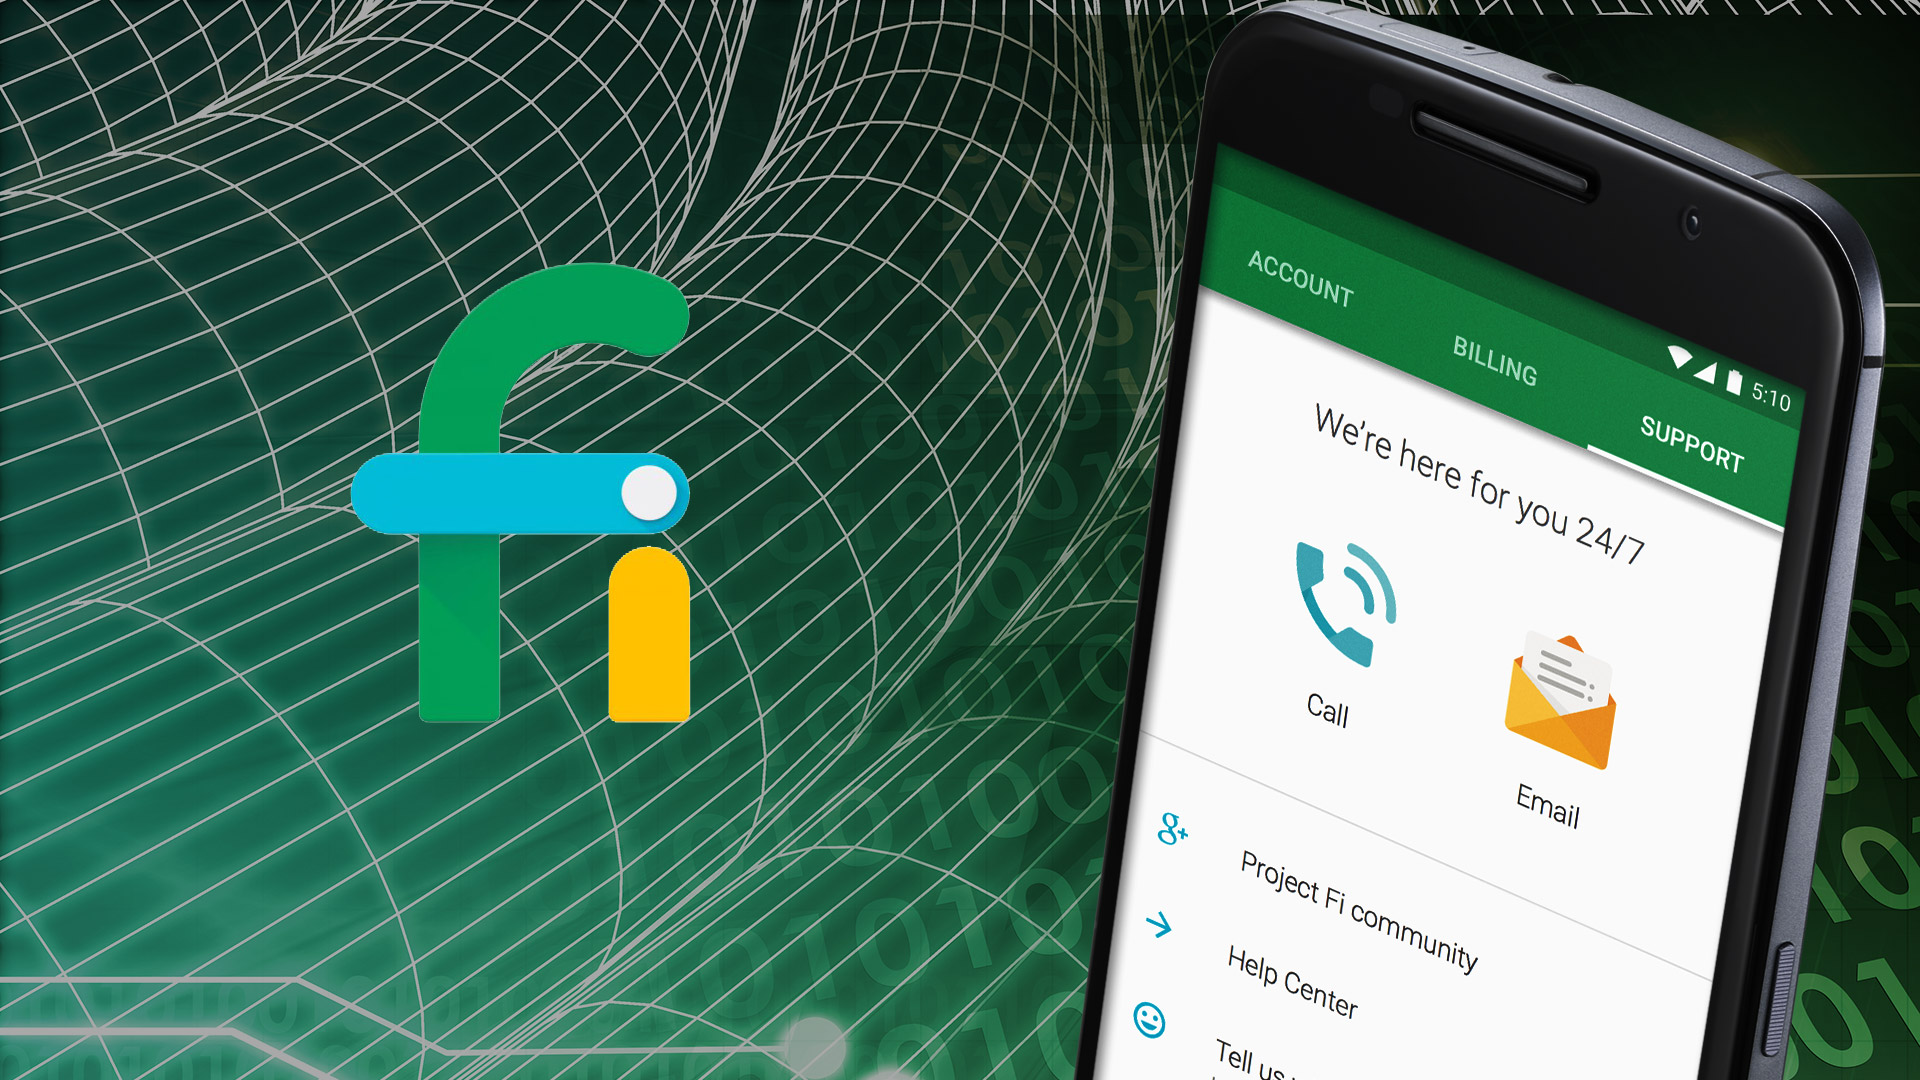 Google testing voice over LTE (VoLTE) with select users in Project Fi